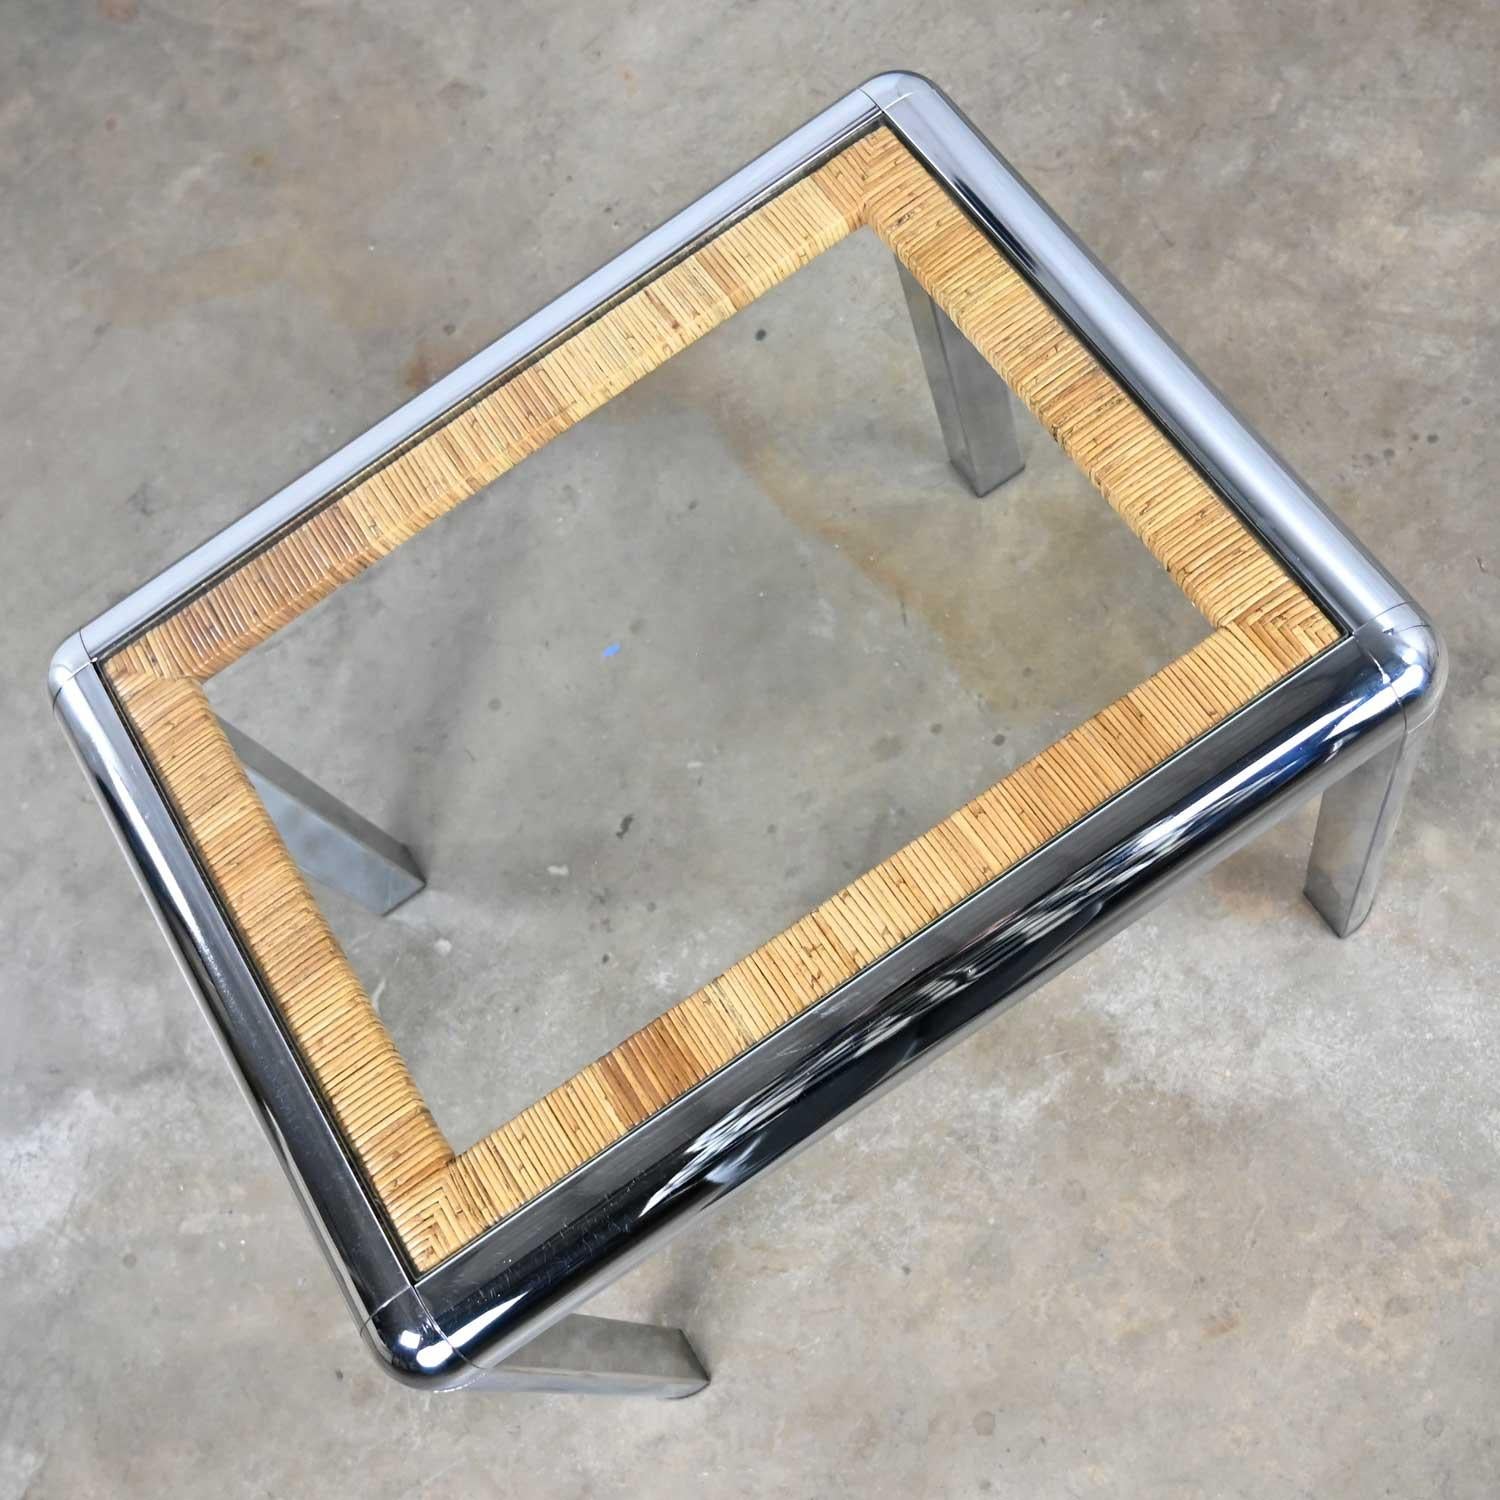 Vintage Modern Rectangular Chrome Glass & Wrapped Rattan Side Table Attr to DIA For Sale 6